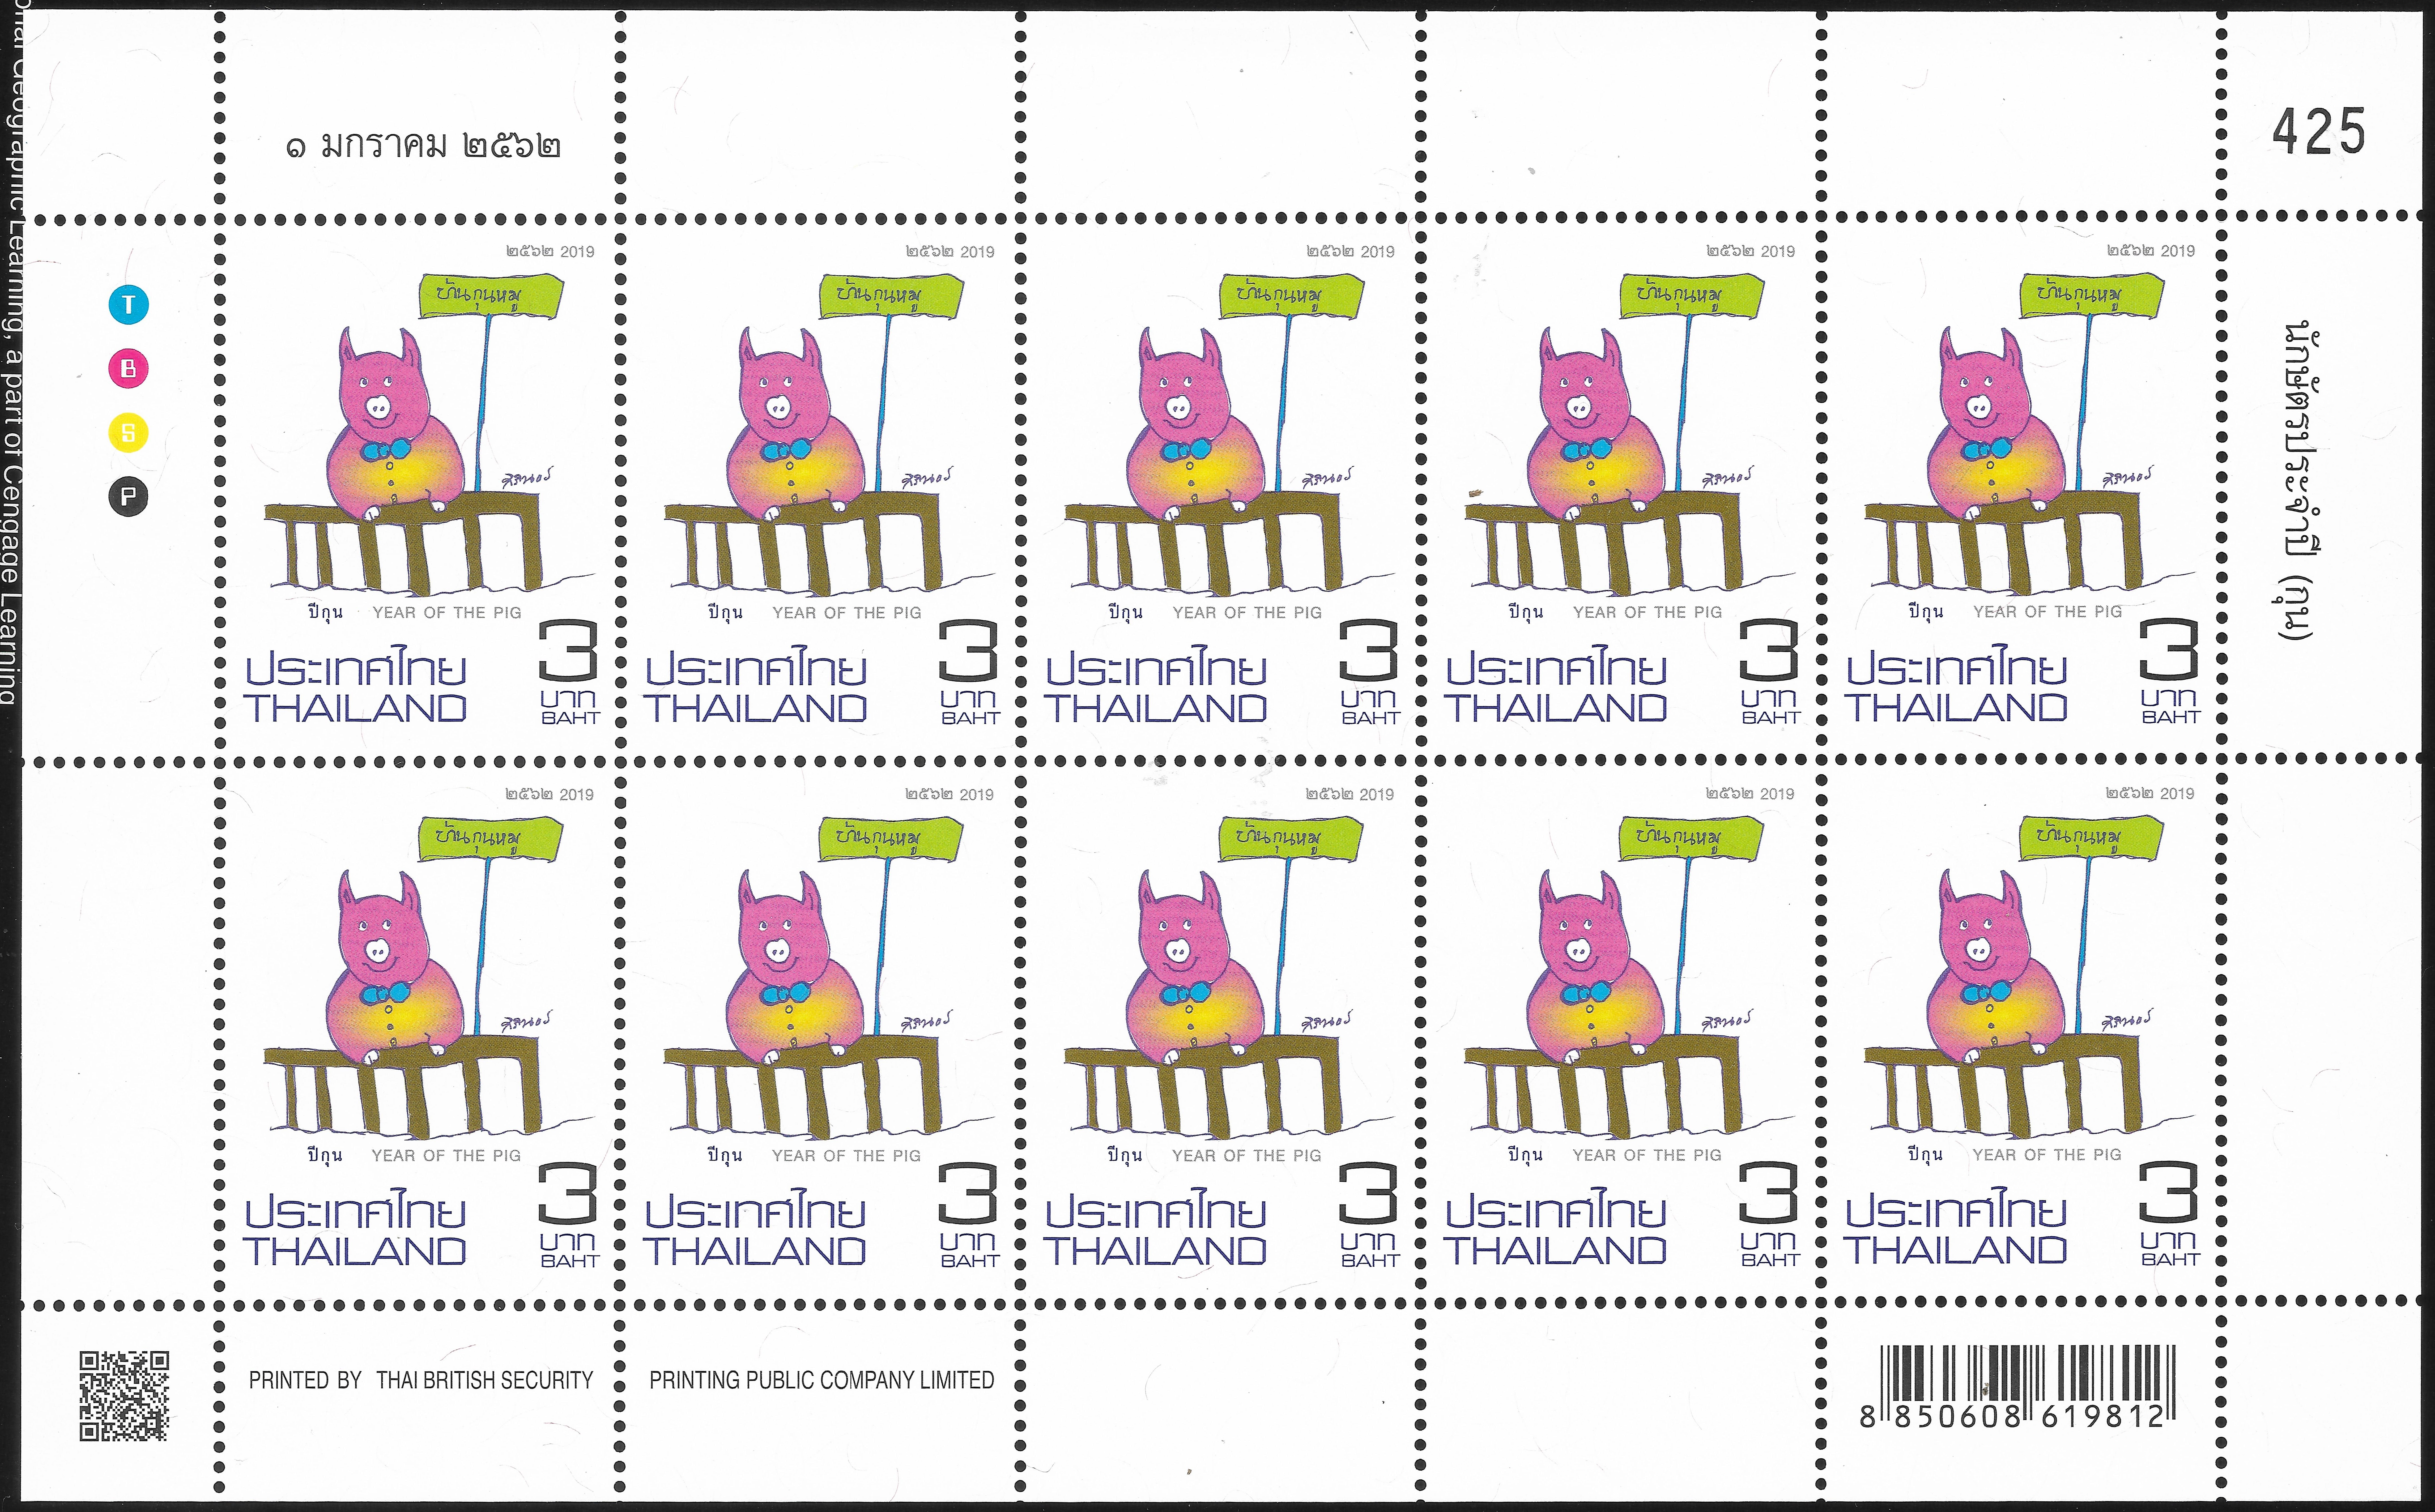 Thailand - Thailand Post #TH1062 (January 1, 2019) sheet of 10